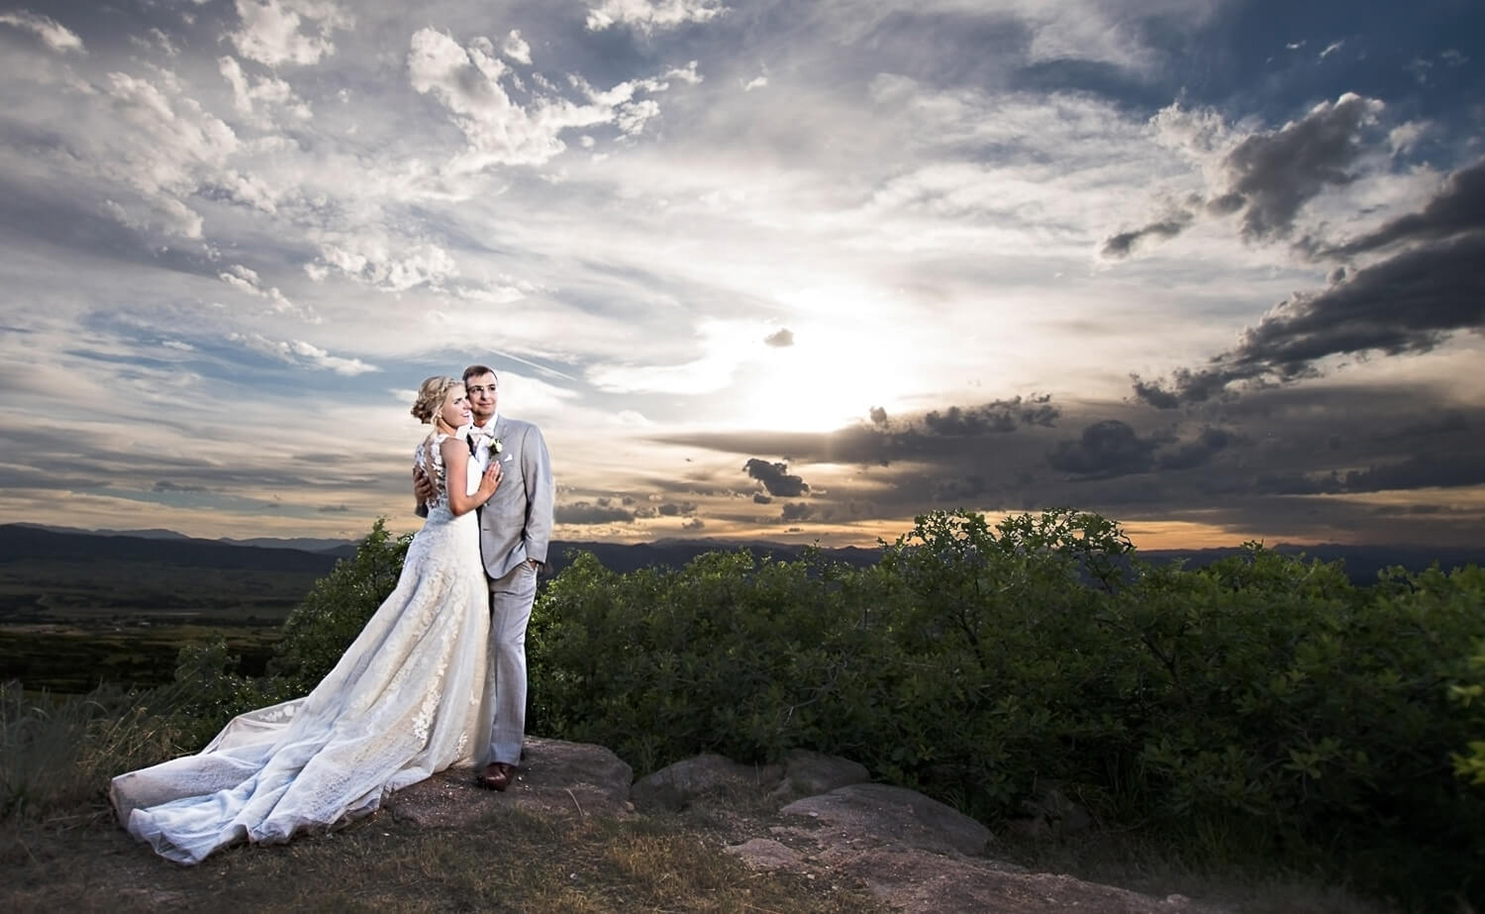 Denver Wedding Photographer | Photography by Jewels